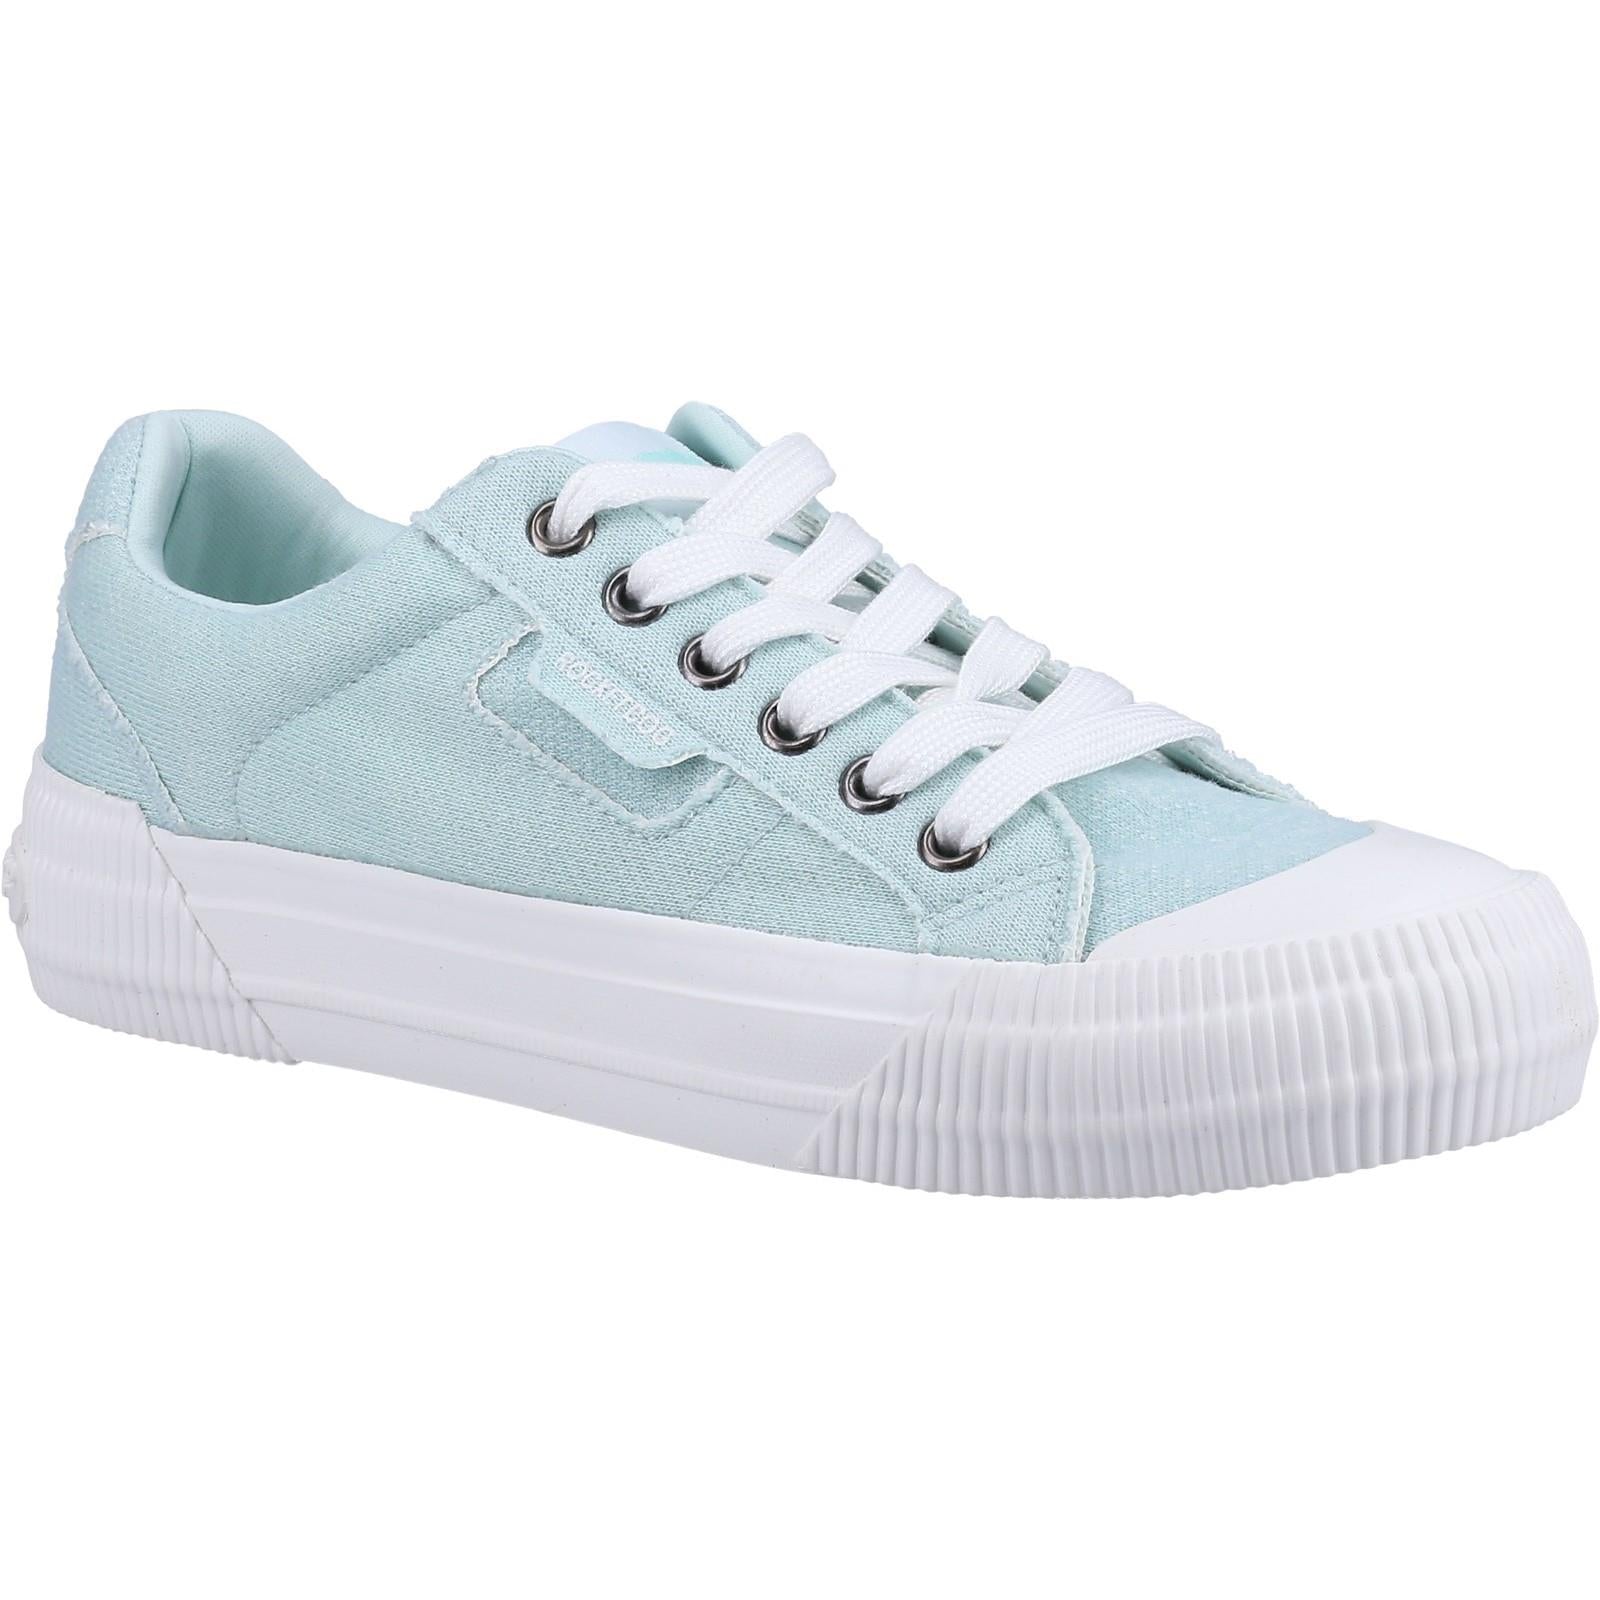 Rocket Dog Cheery Skirball Jersey turquoise ladies plimsoll trainers shoes